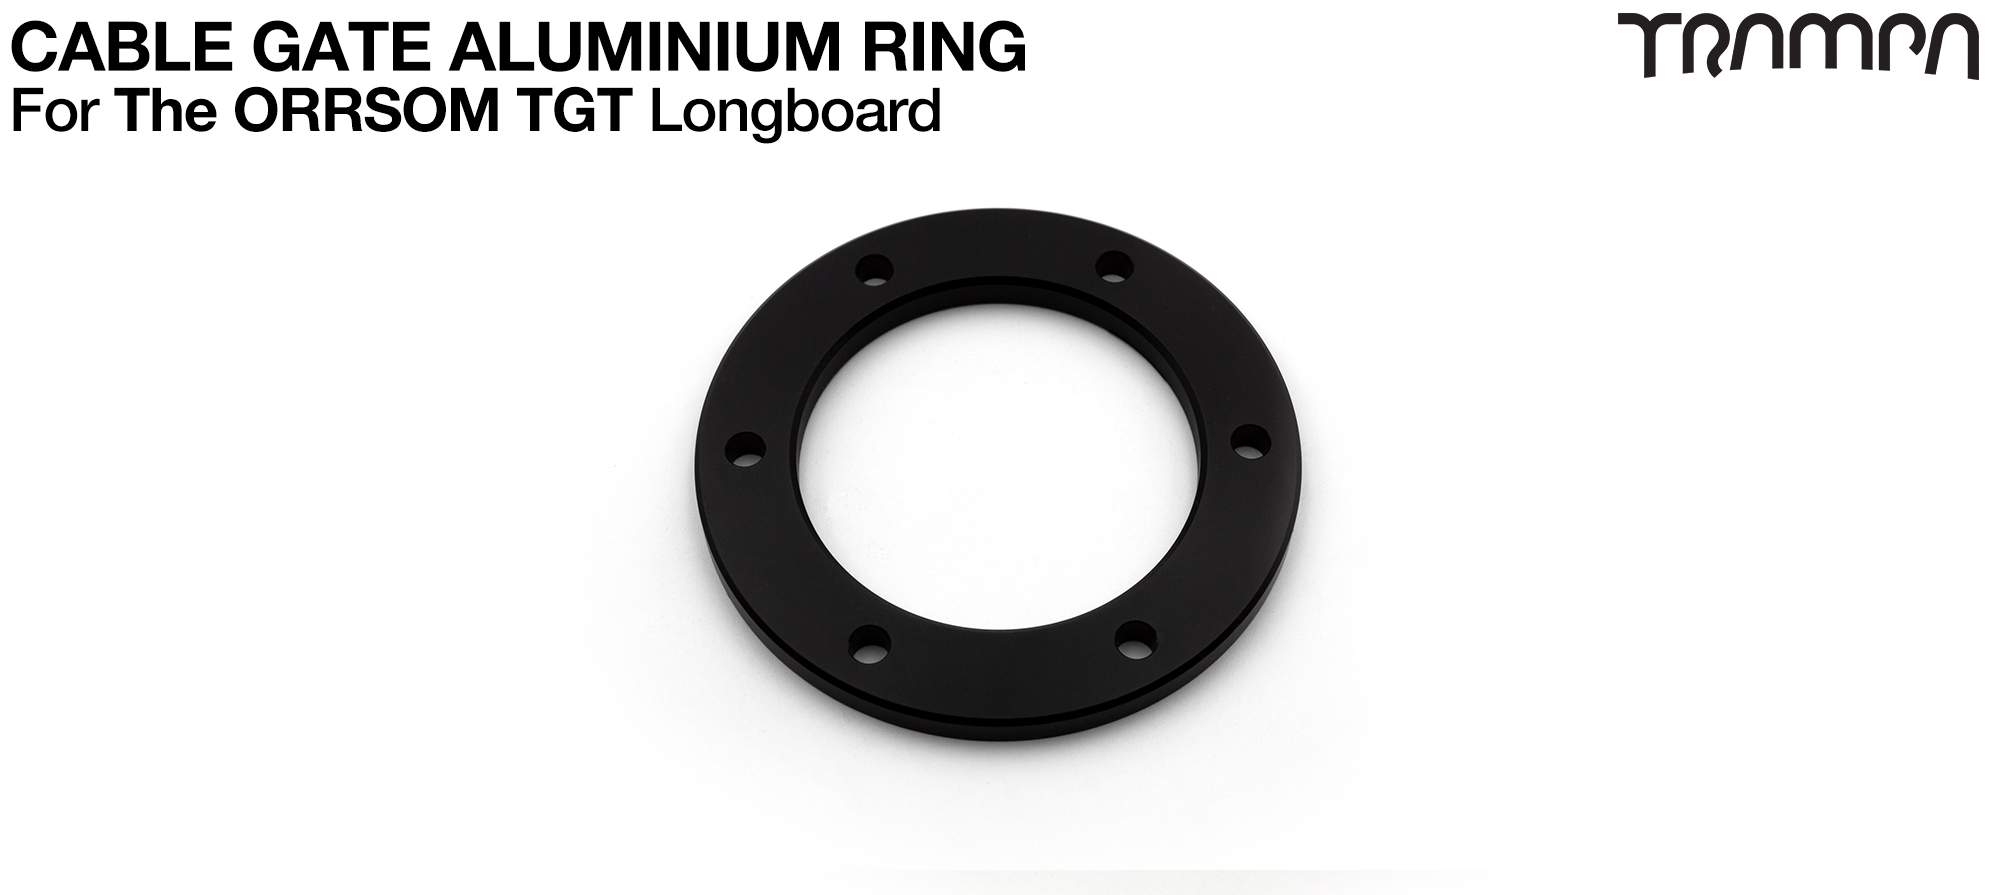 Charge Point CABLE GATE Aluminium Ring - Anodised BLACK